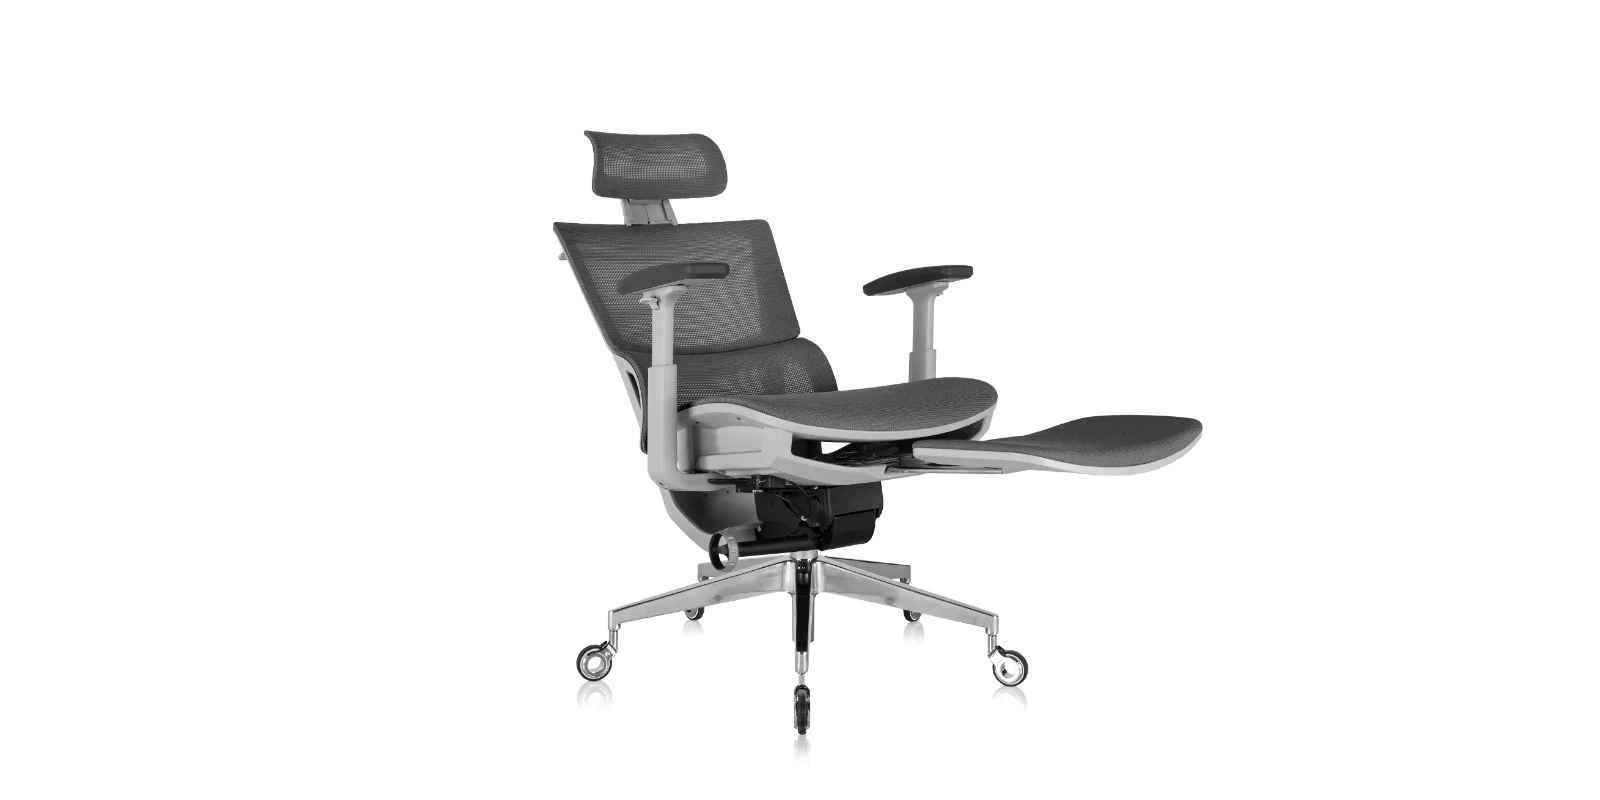 Office chair for posture support